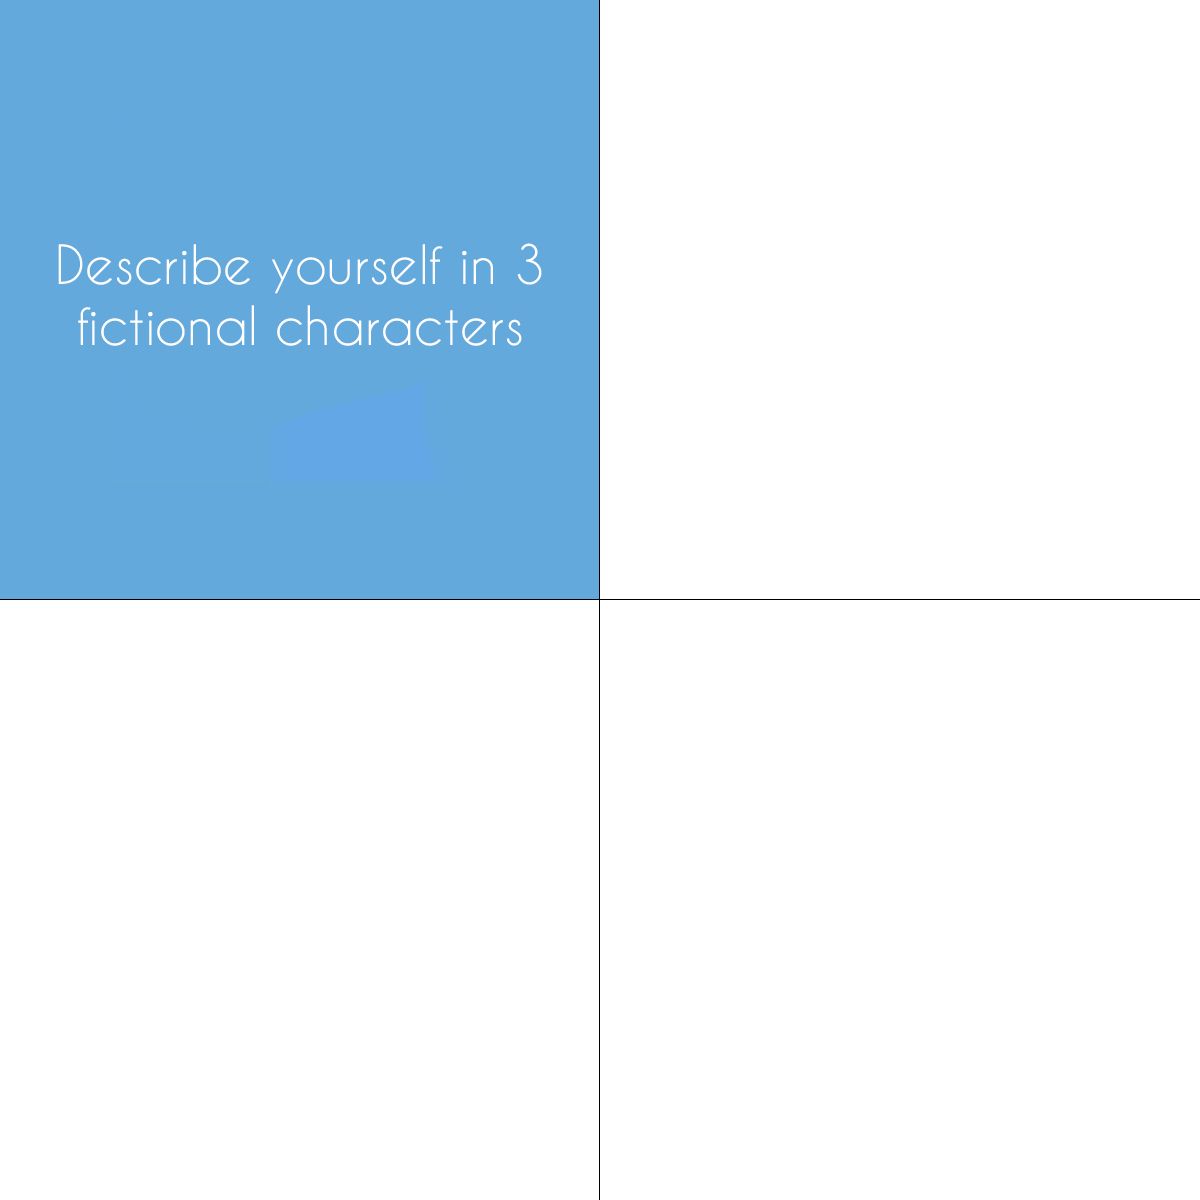 High Quality Describe Yourself in 3 fictional characters Blank Meme Template